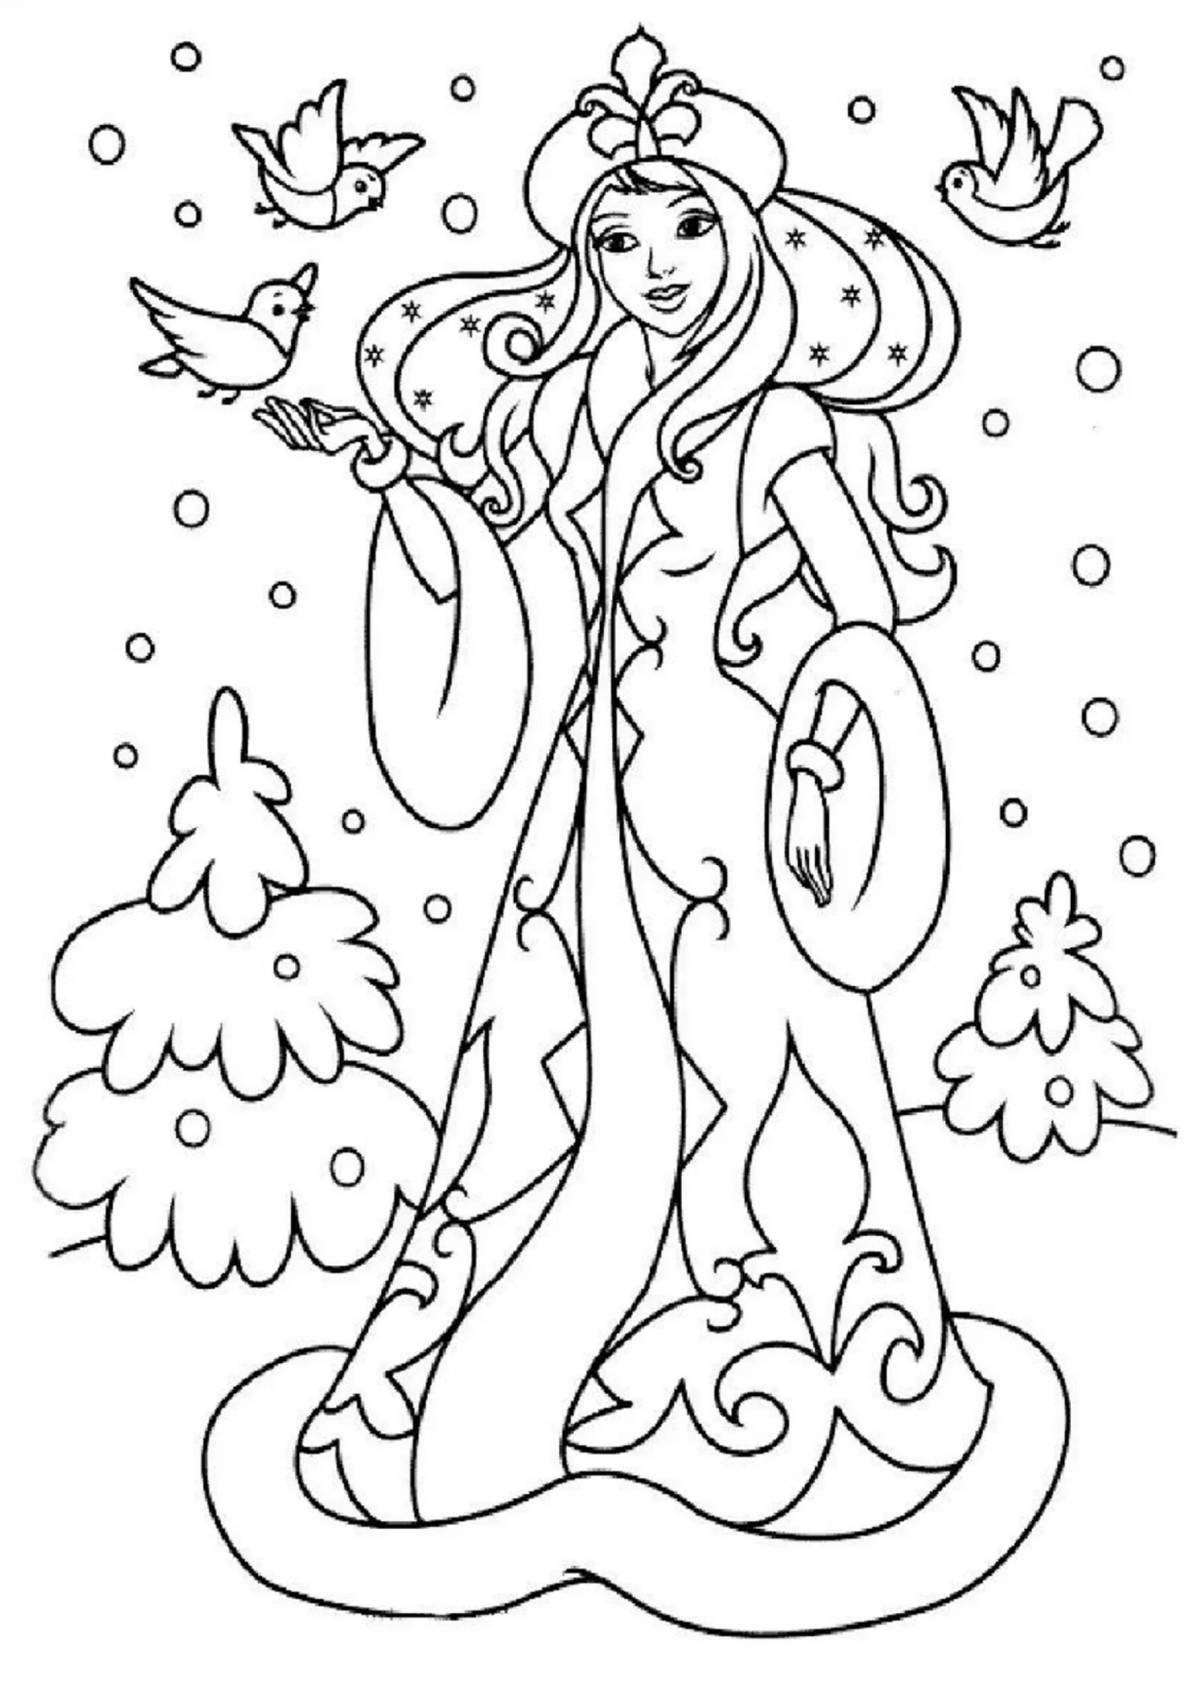 Coloring book alluring New Year's Snow Maiden